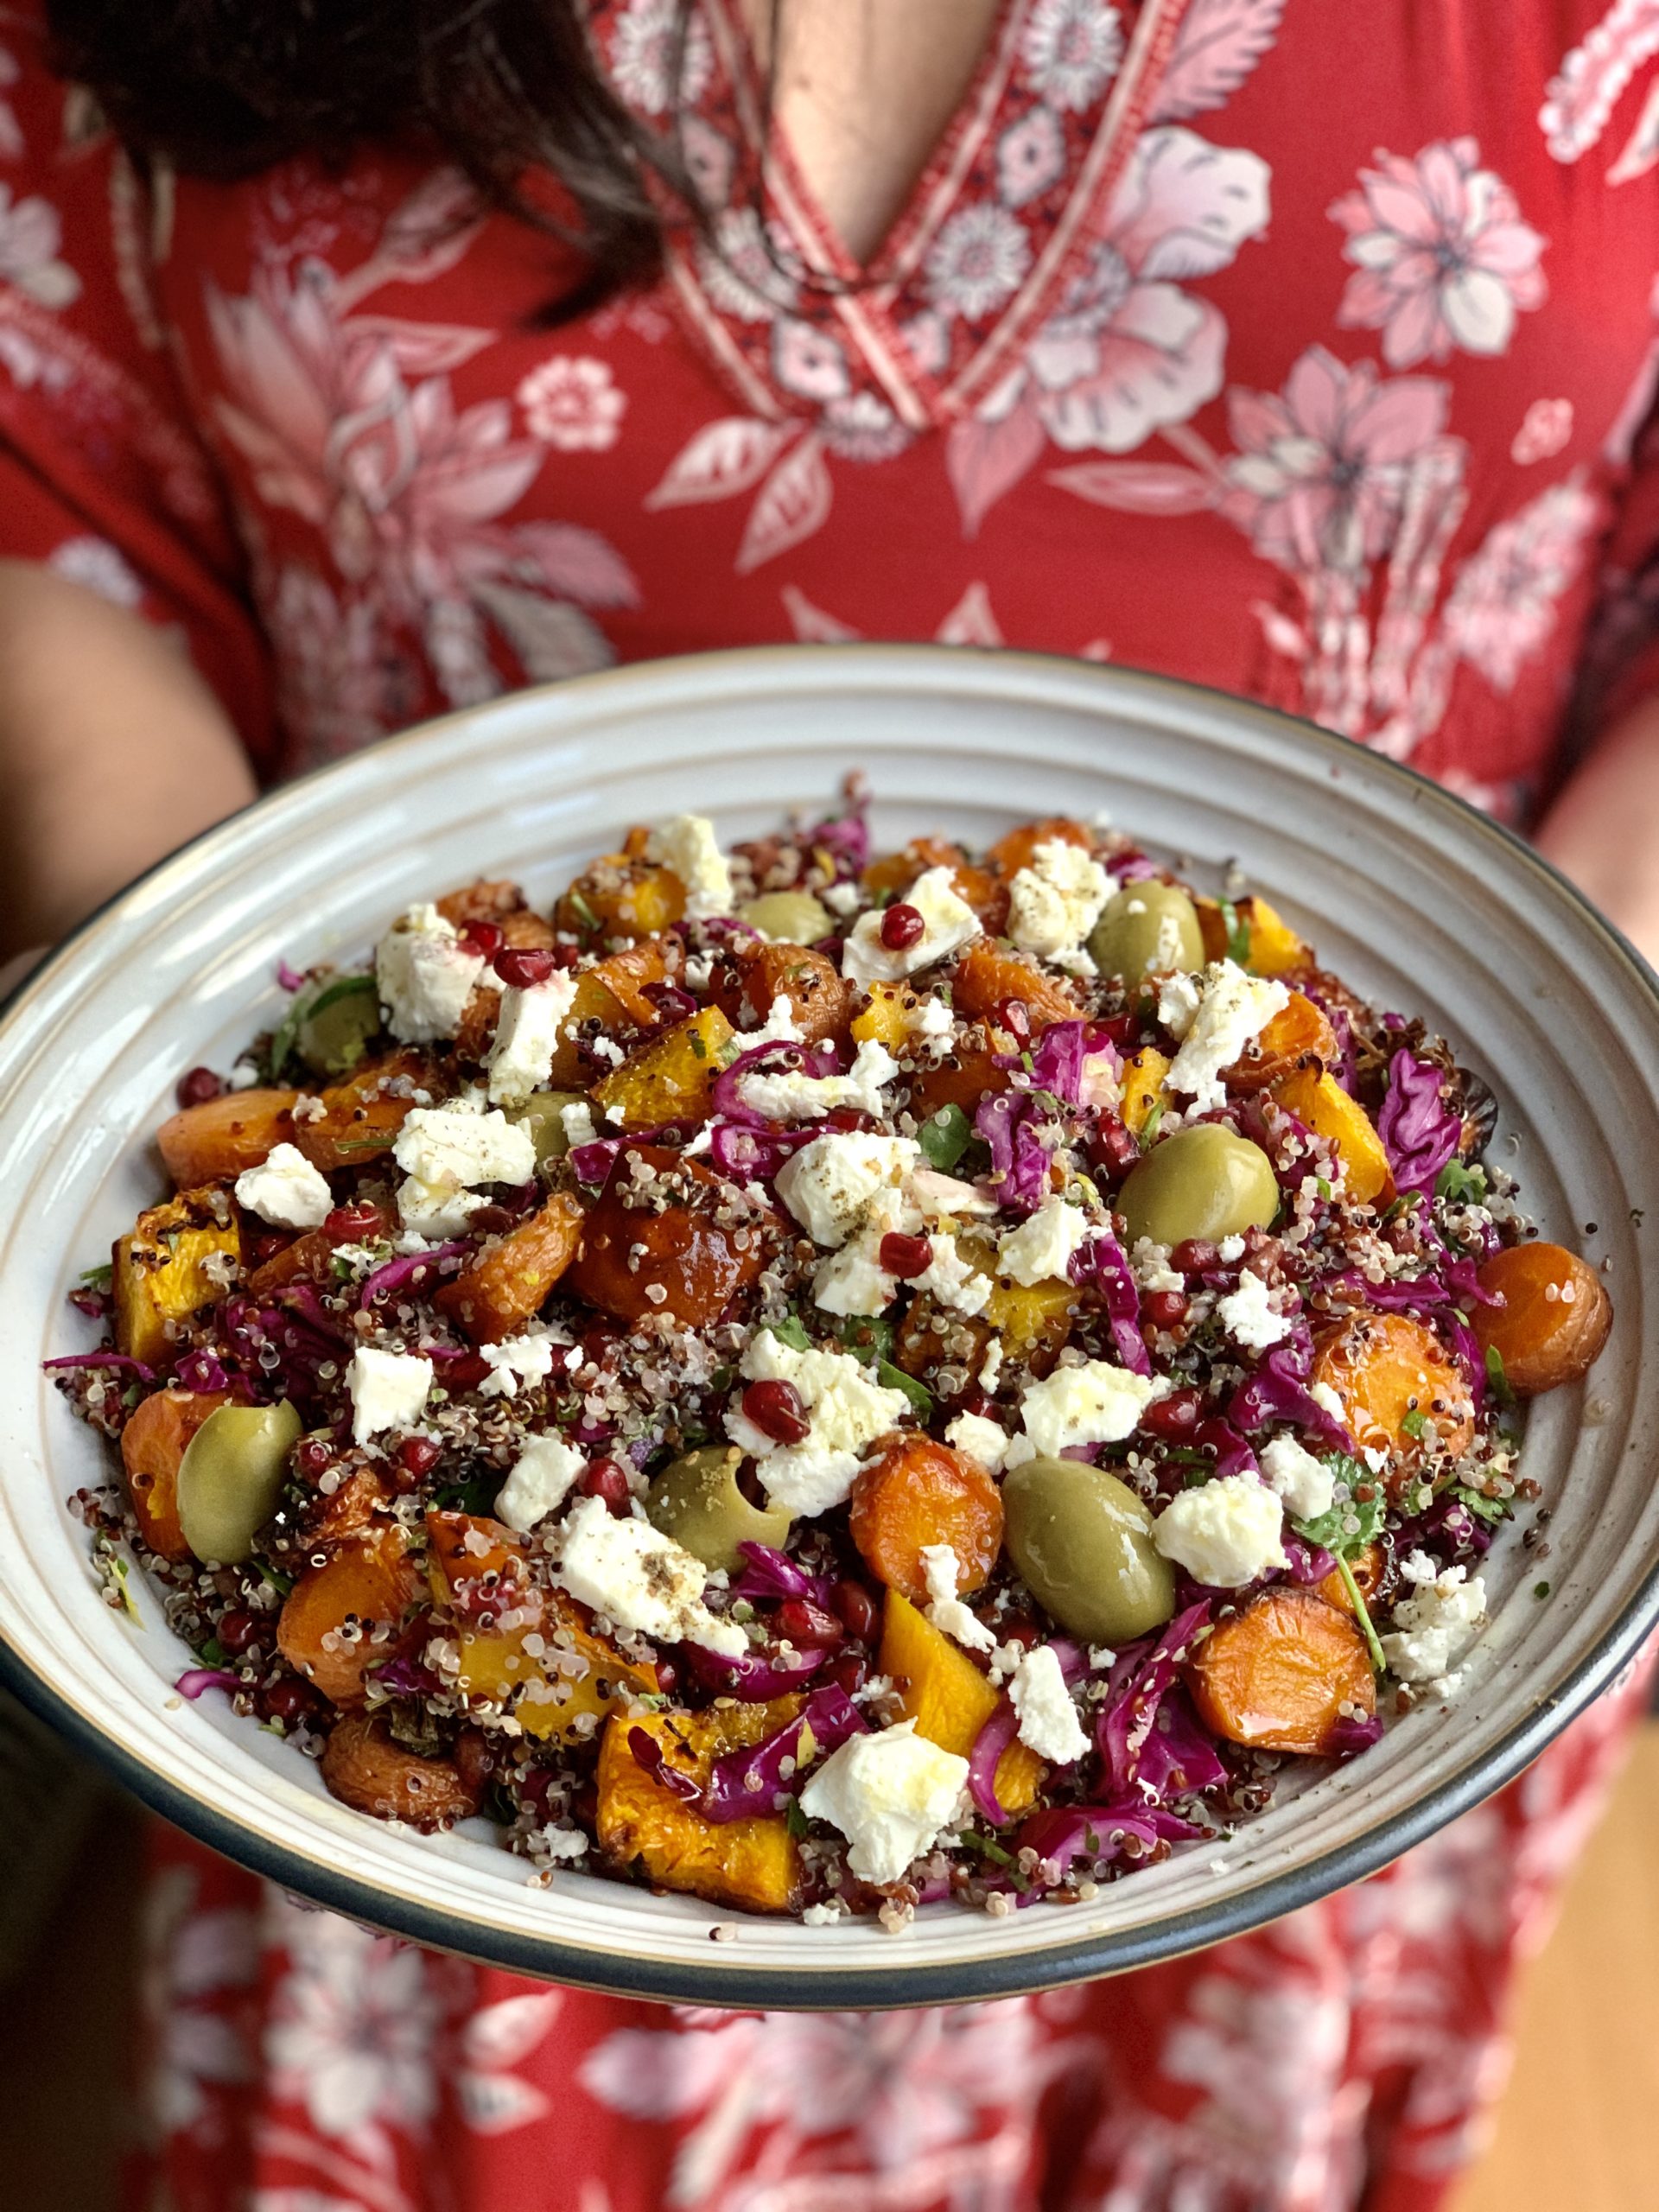 konsol desillusion mikrobølgeovn 15 Best Recipes to Use Up Leftover Red Cabbage | The Crooked Carrot